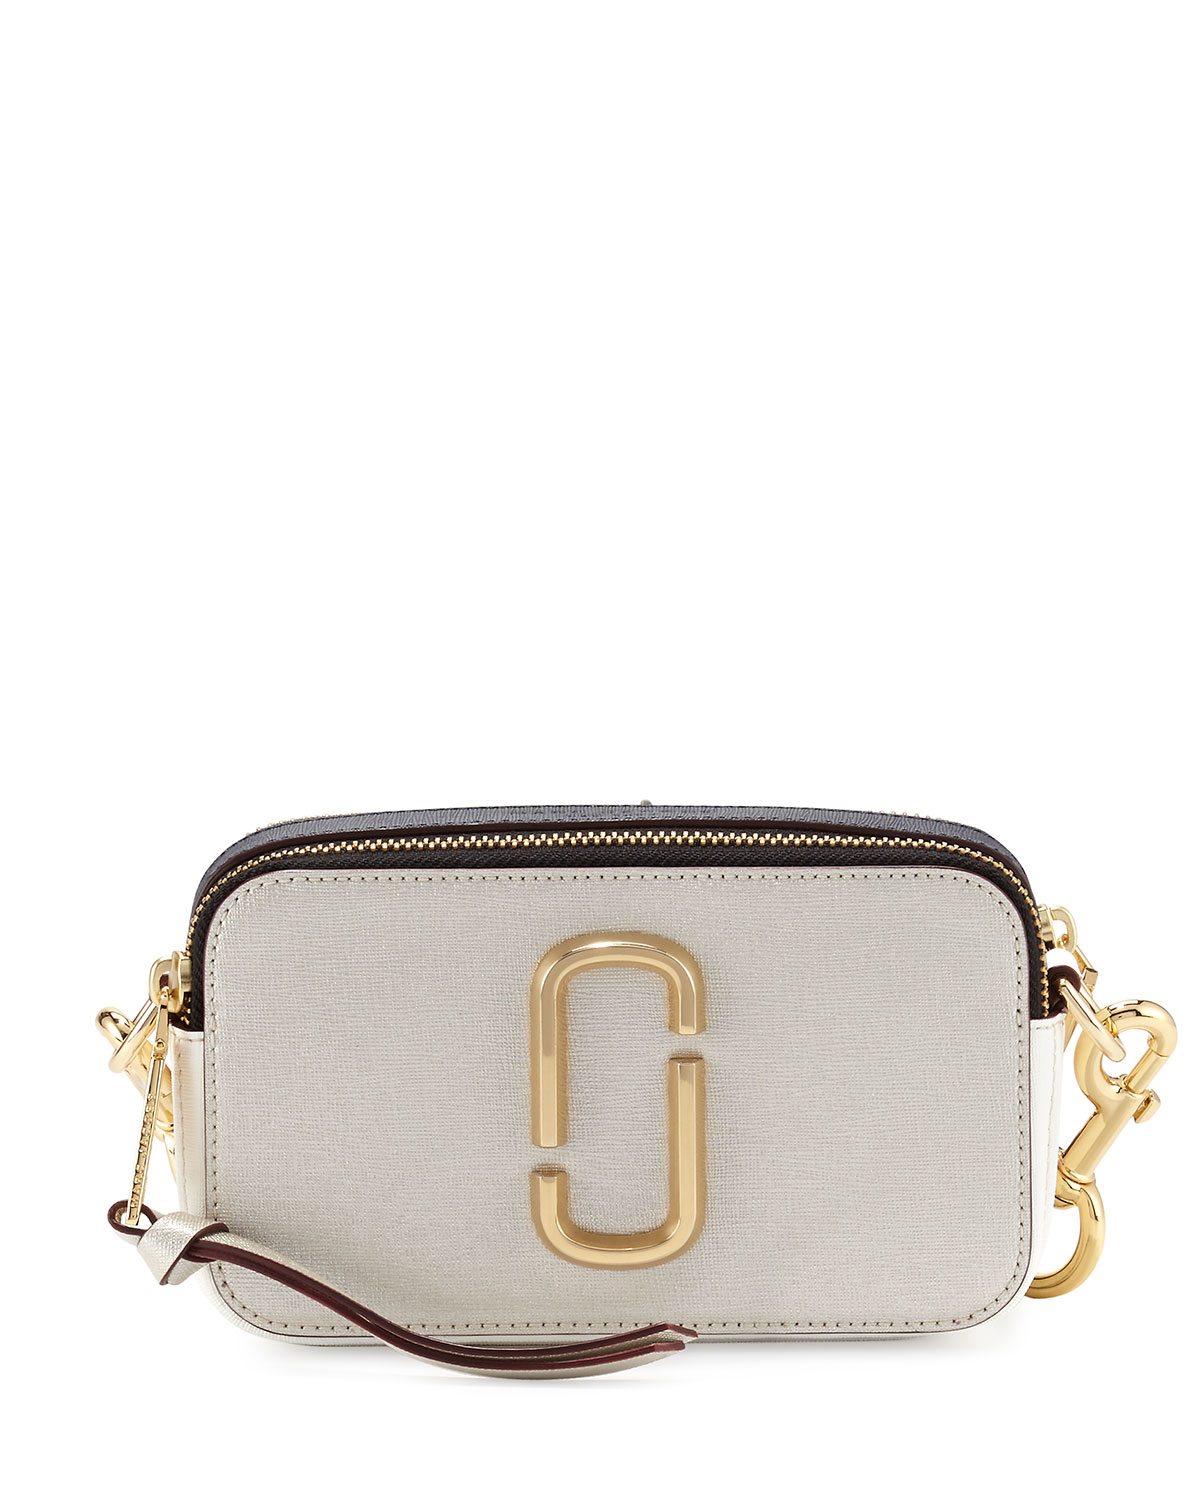 Marc jacobs Snapshot Small Leather Camera Bag in Black (SAND CASTLE ...